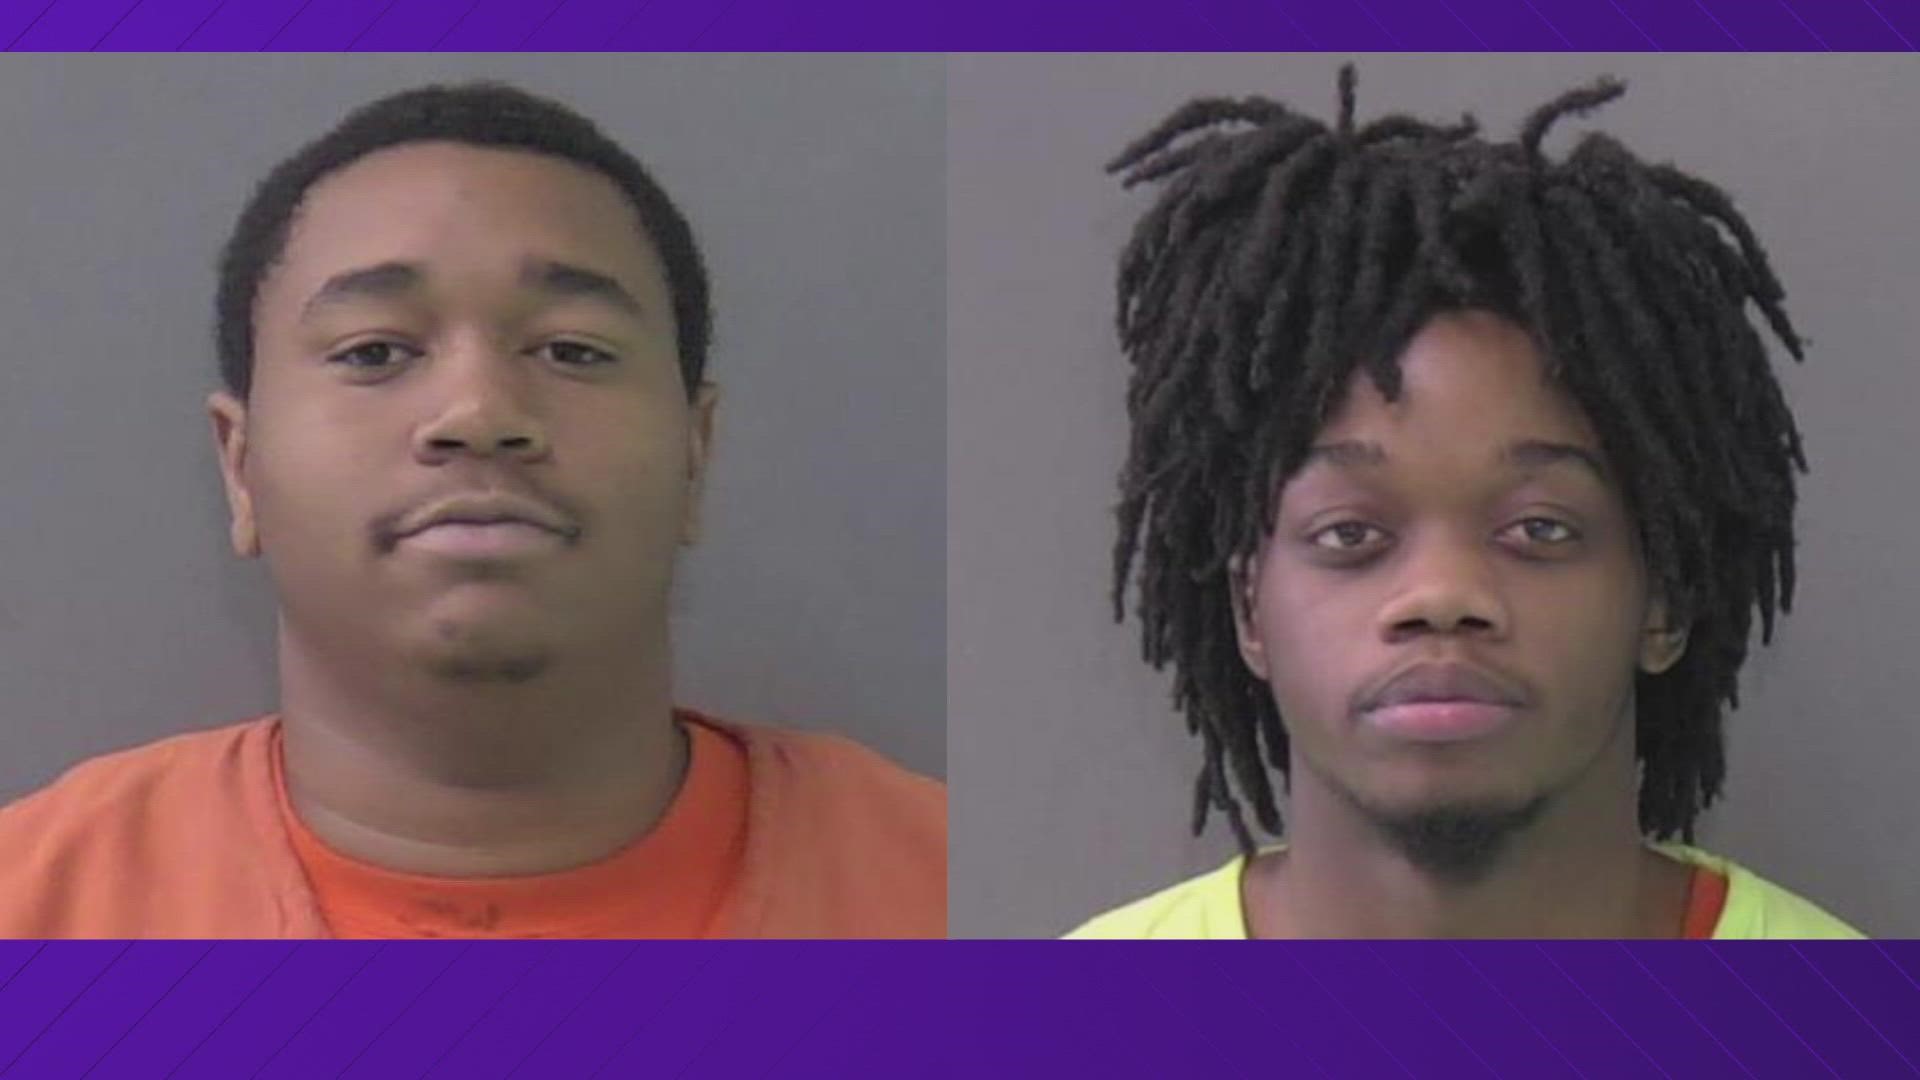 Both men were indicted for murder by a Bell County grand jury Wednesday.